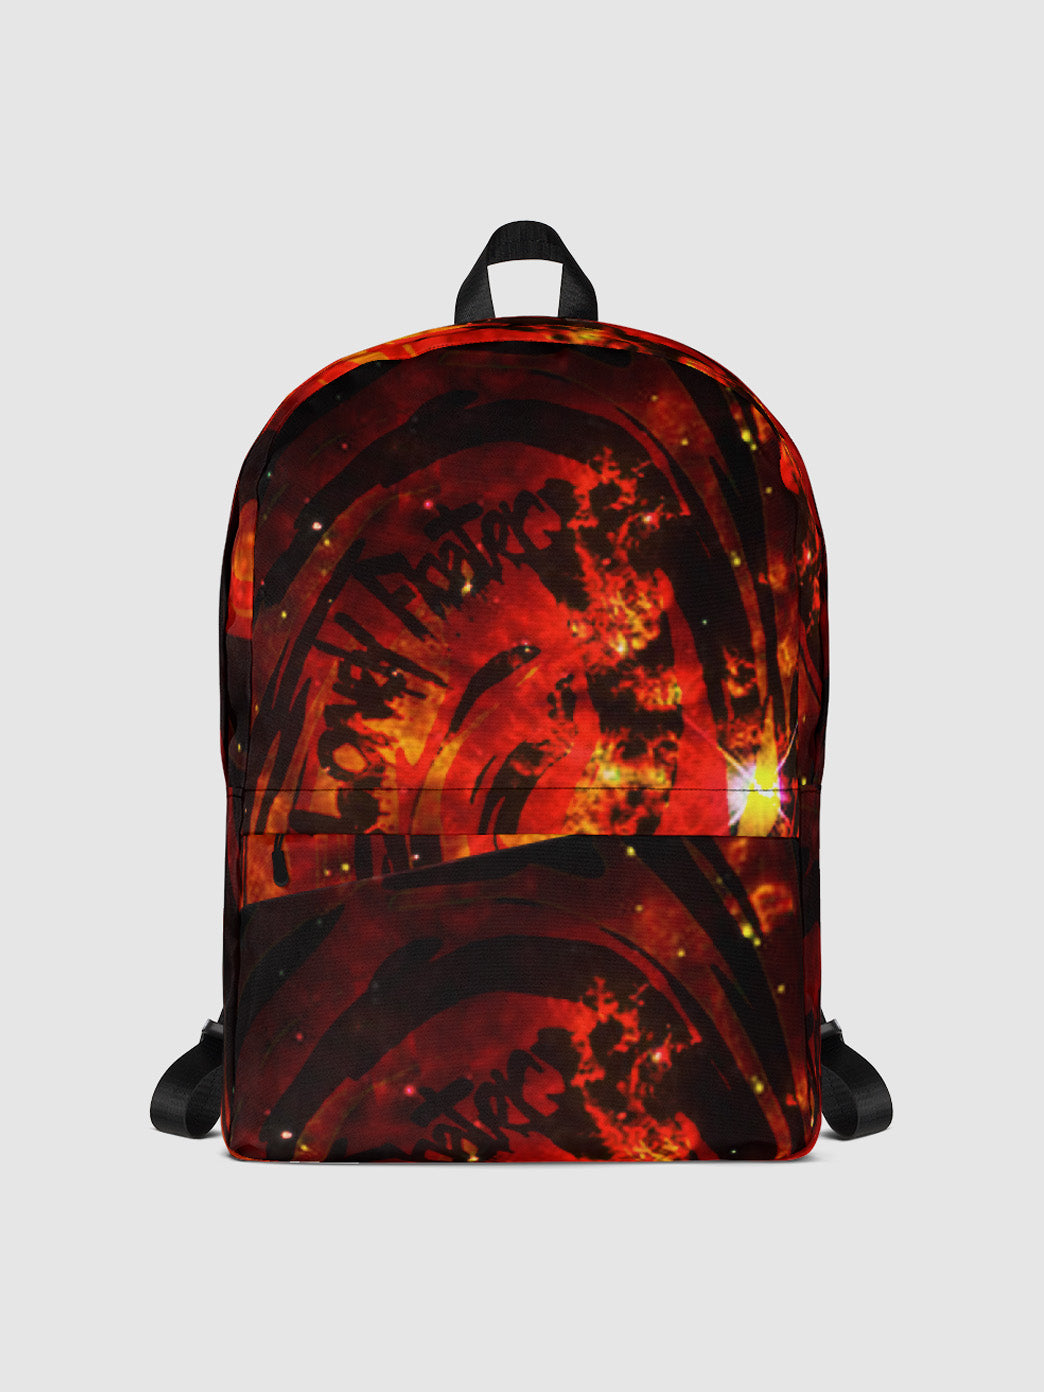 Fire Red Backpack